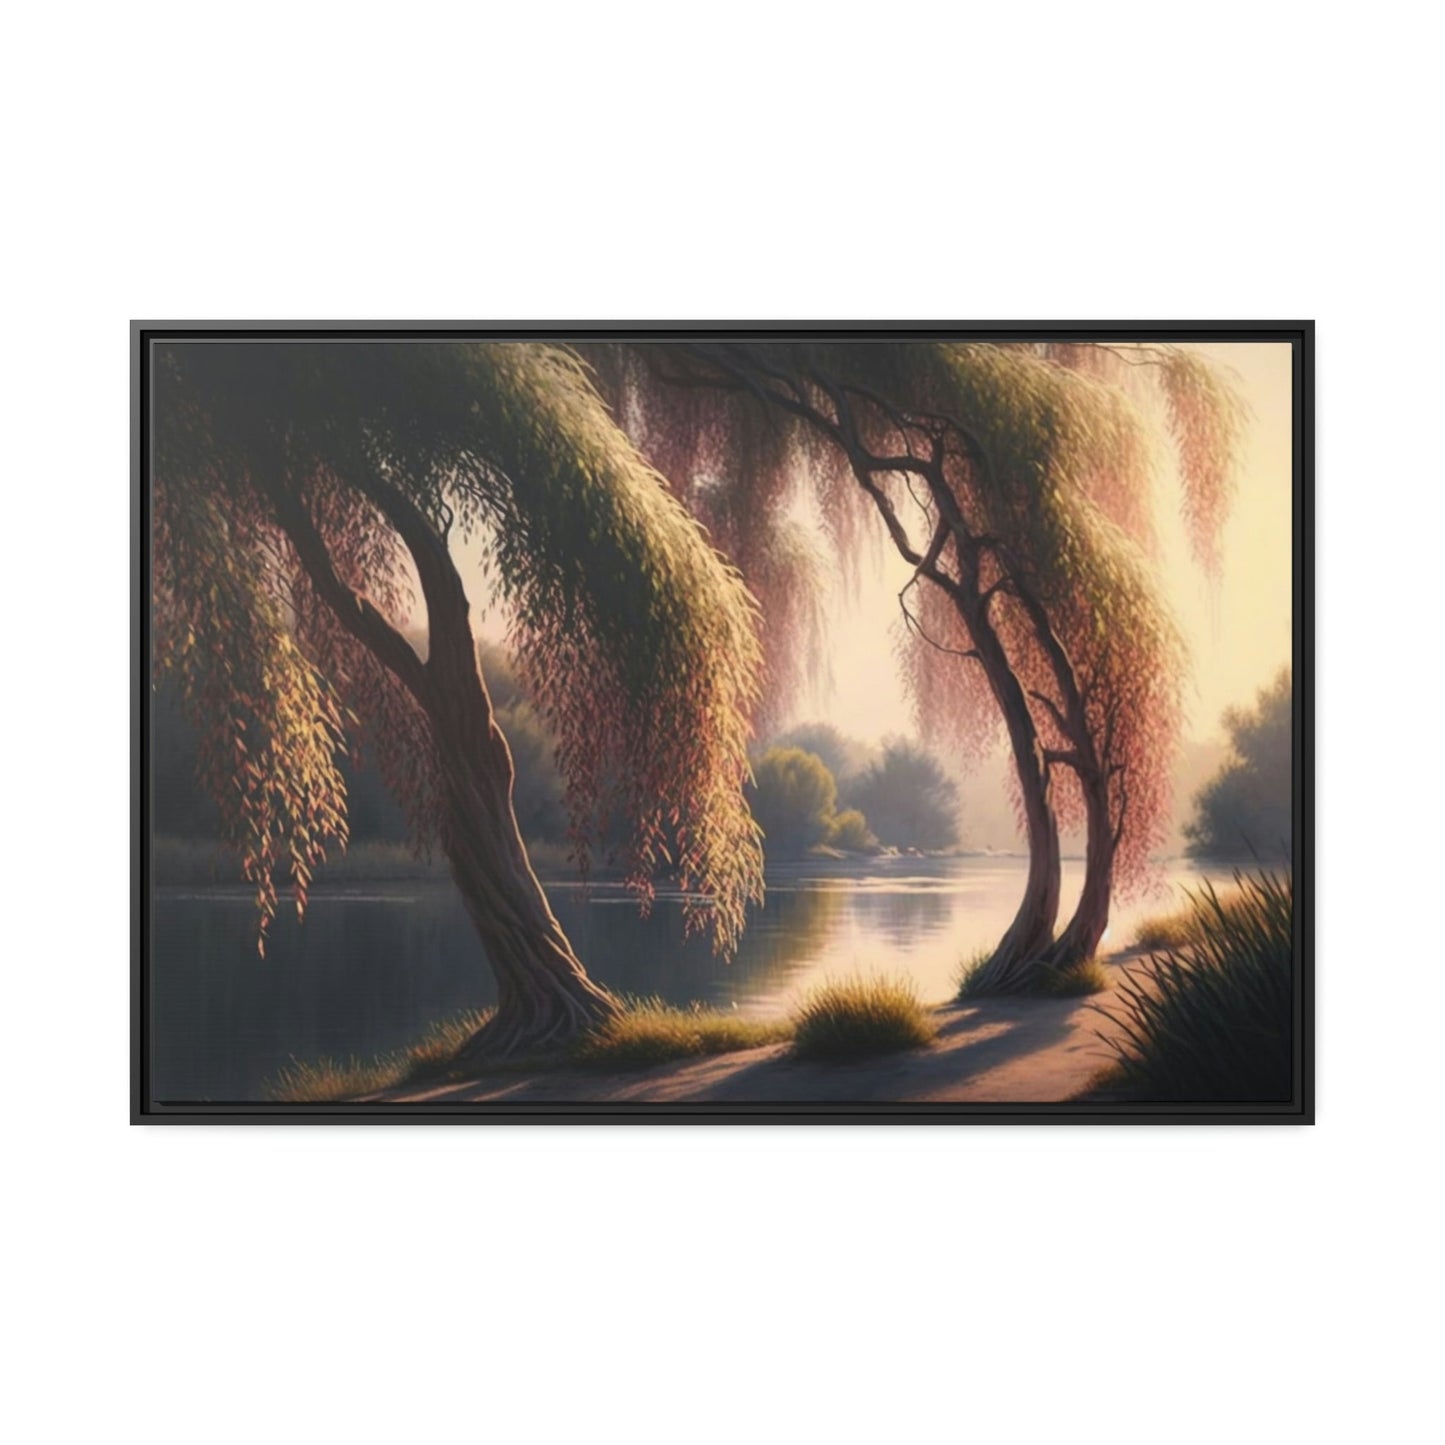 Enchanted Willows: A Dreamy Landscape